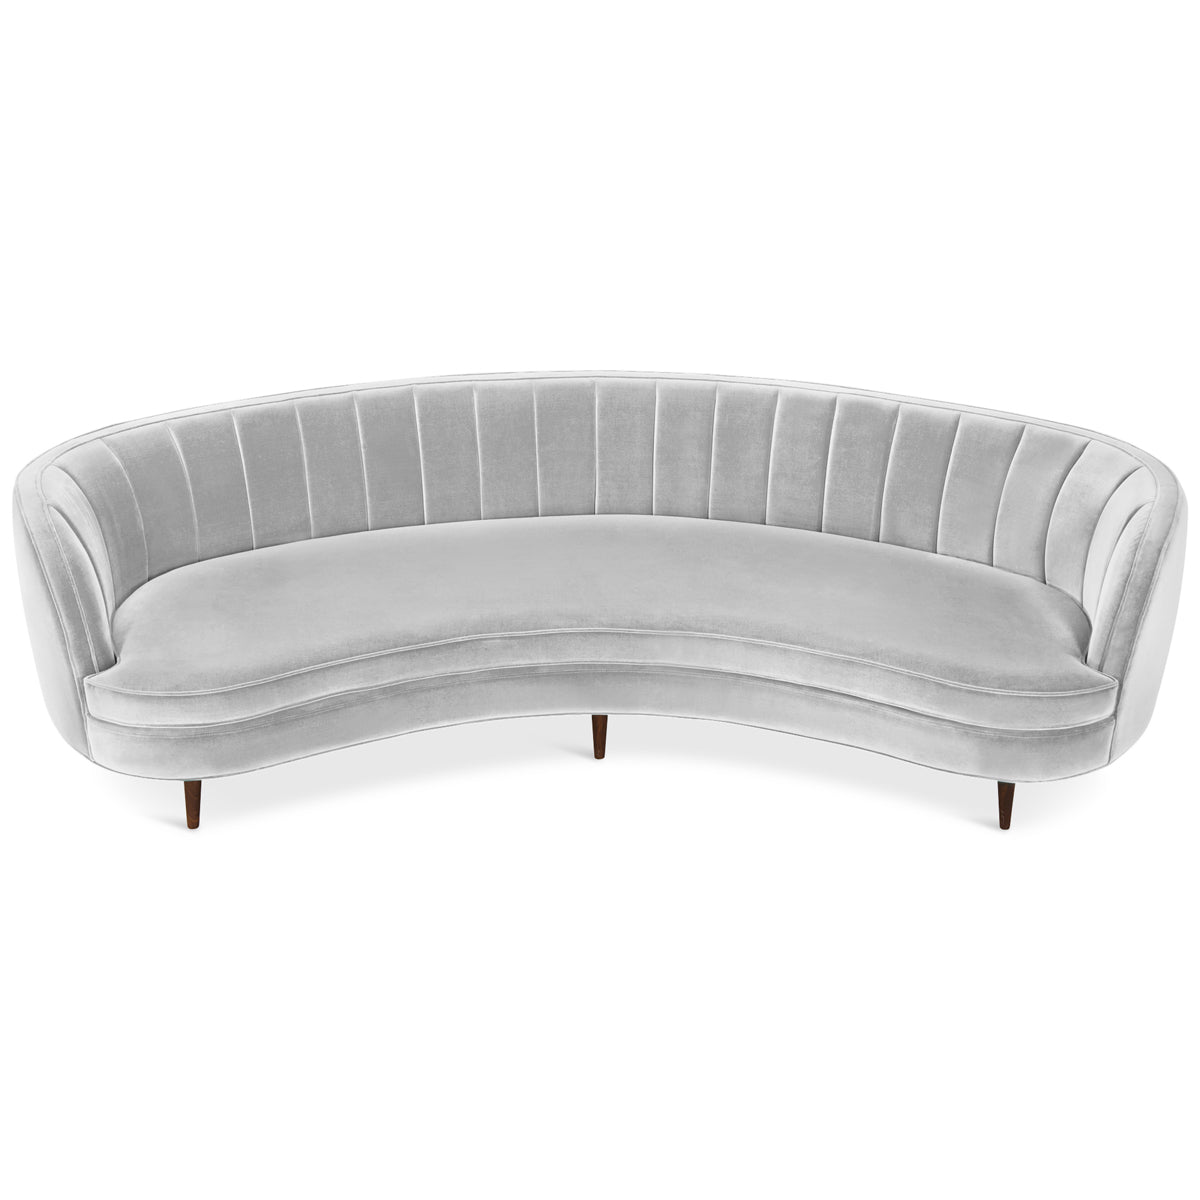 St. Tropez 2 Curved Sofa with Channel Tufting - ModShop1.com